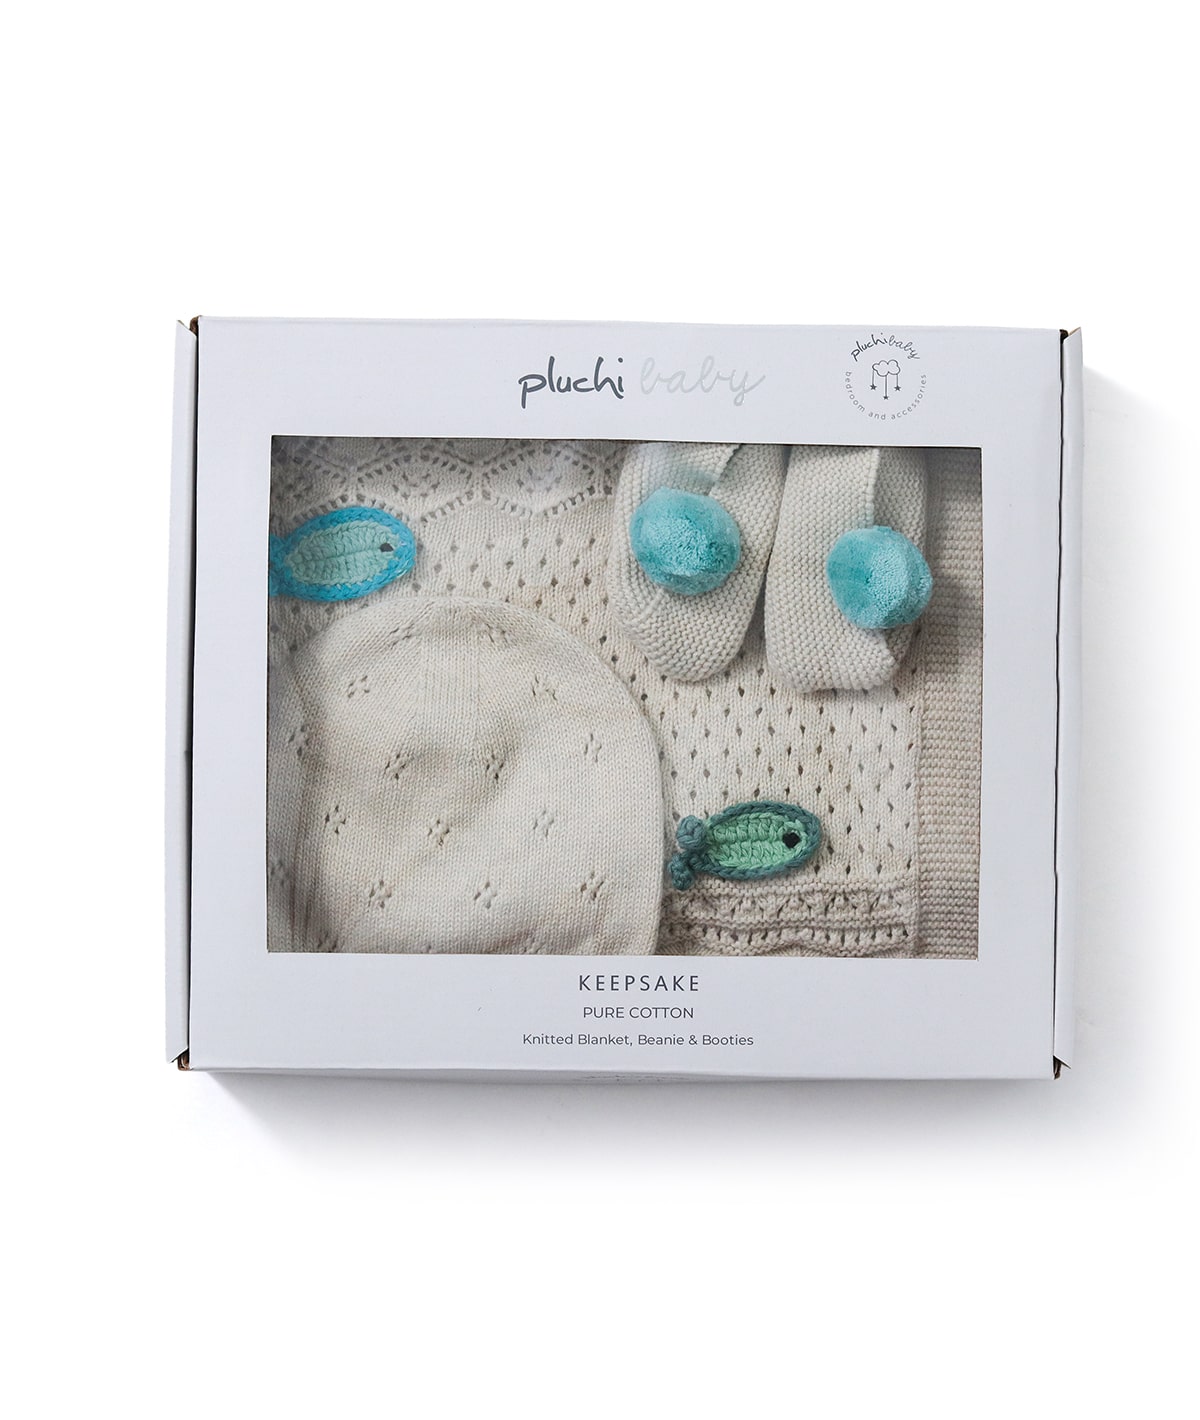 Keepsake Baby Gift Set- Crochet Knit Blanket with Hand Crochet Fish with Booties & Cap in Box Packing